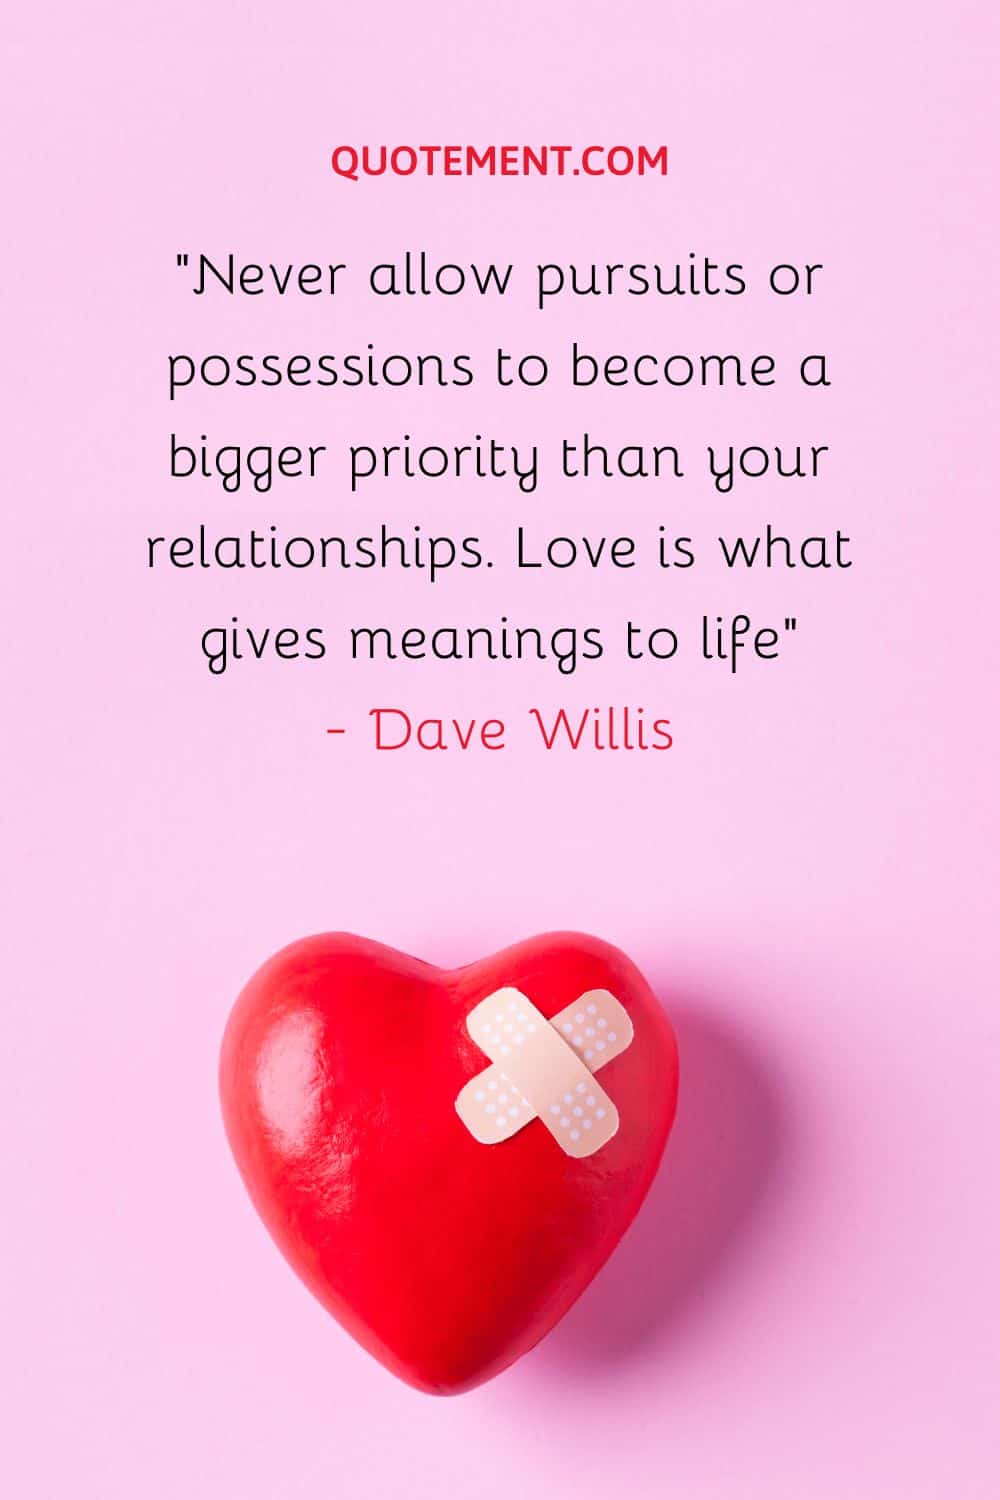 Never allow pursuits or possessions to become a bigger priority than your relationships